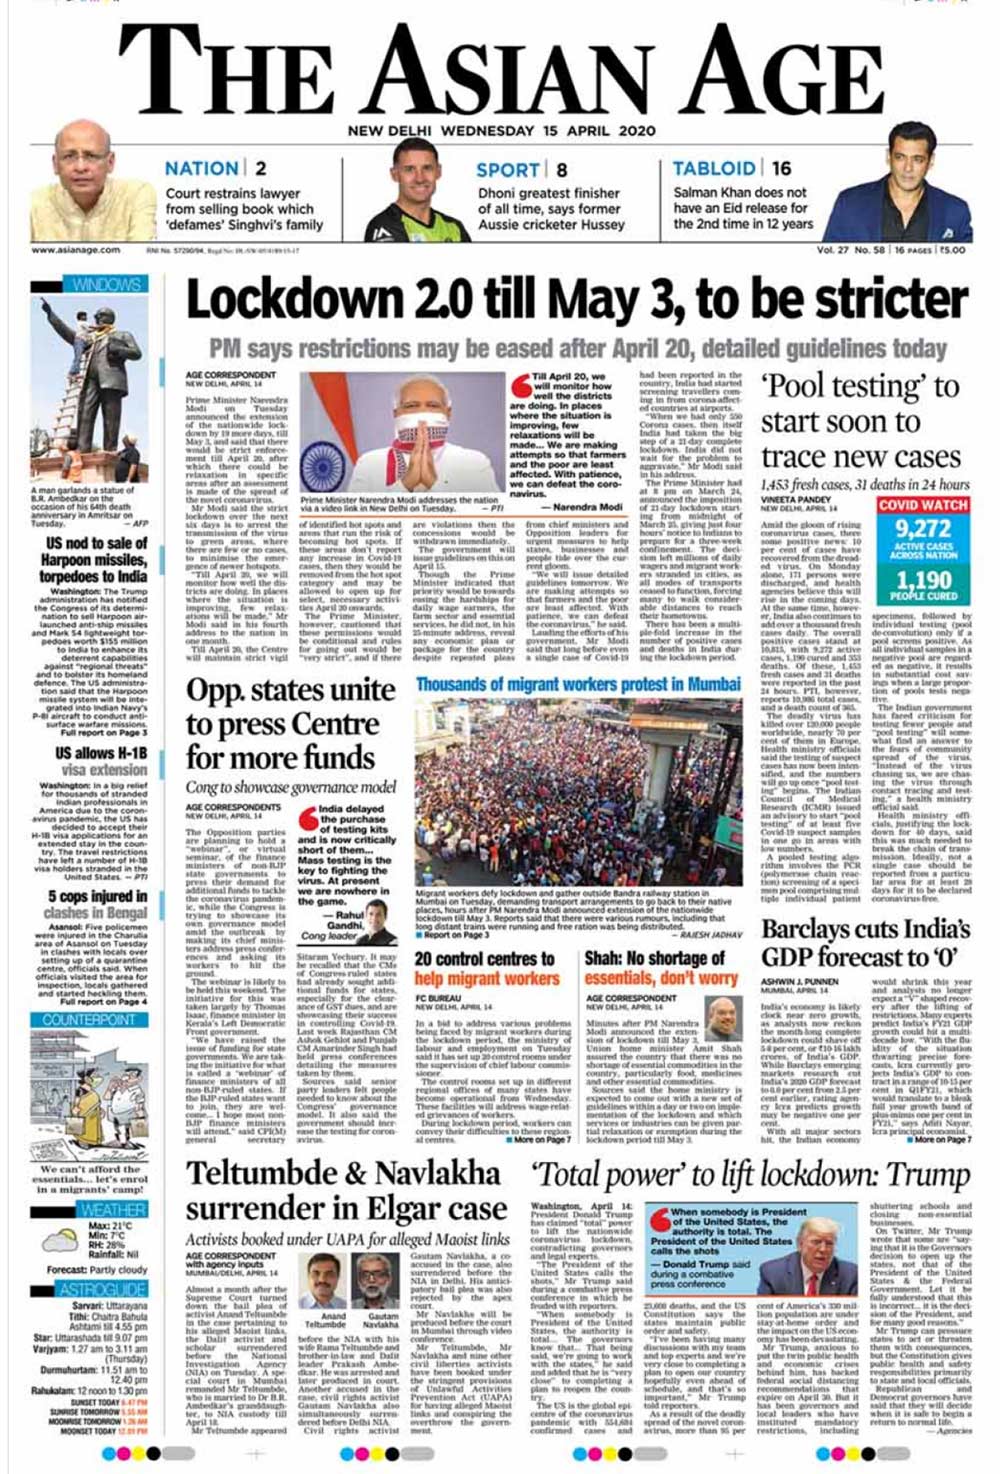 Lockdown Extended Till May 3, Says PM; Review Of Restrictions On April 20, Other Big Stories